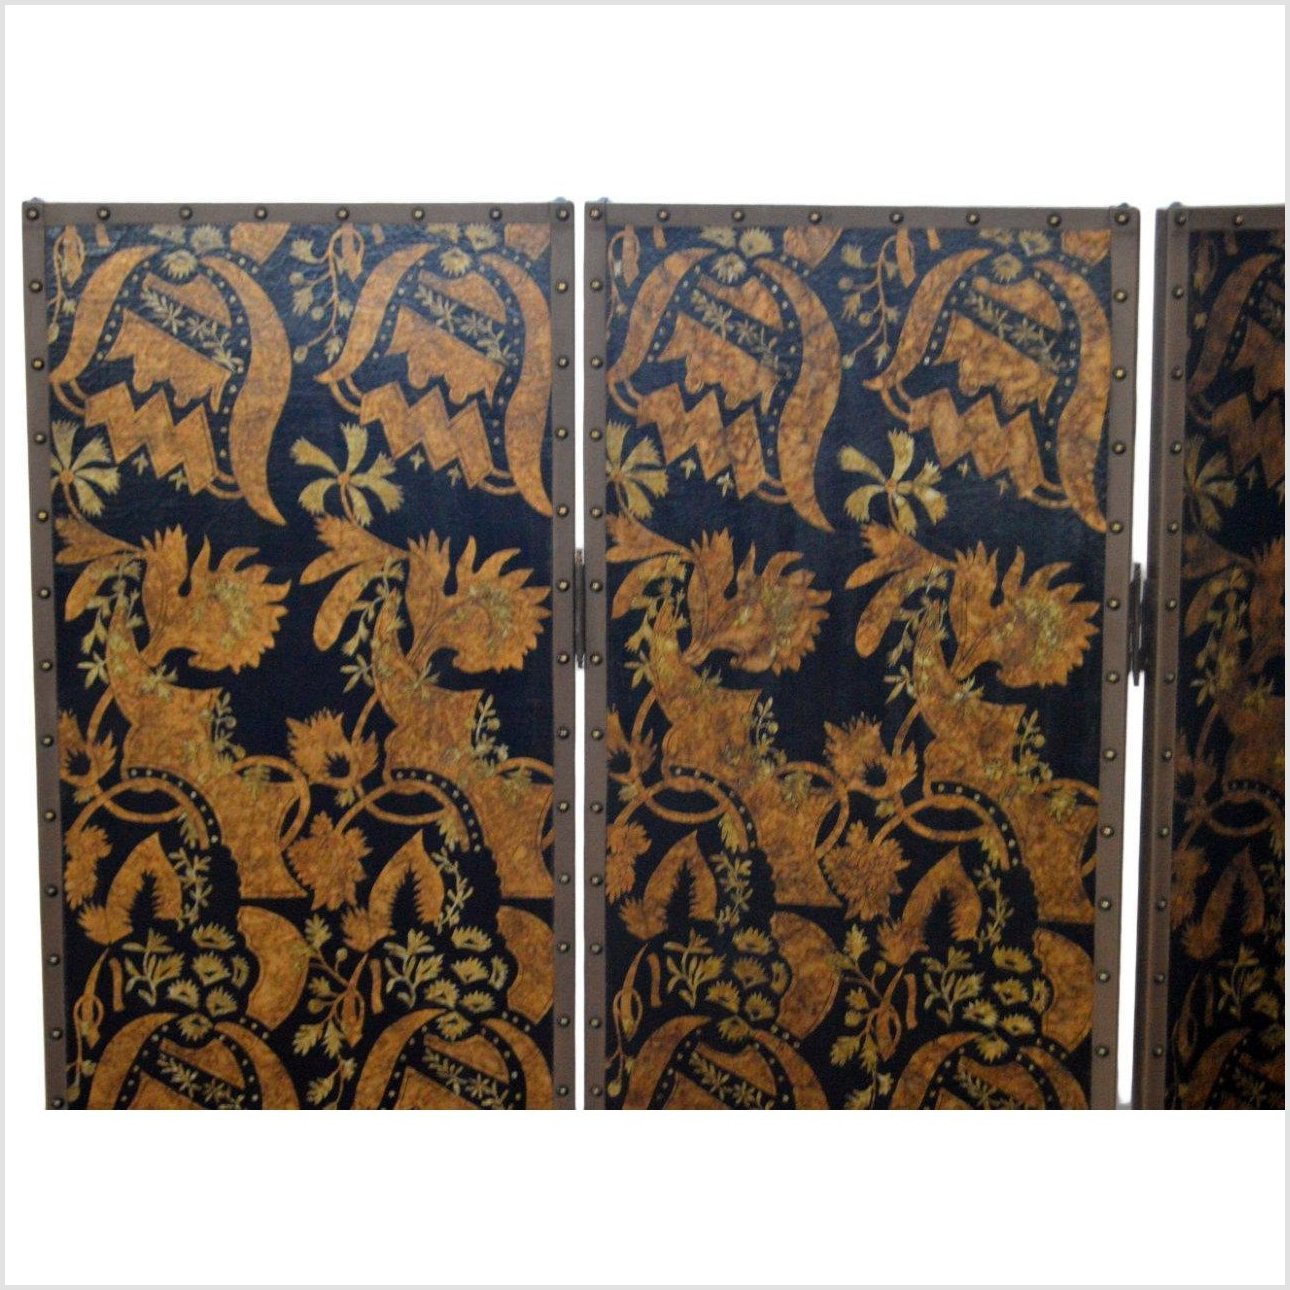 Black 4-Panel Screen with Gold Repetitive Pattern Design-YN2835-4. Asian & Chinese Furniture, Art, Antiques, Vintage Home Décor for sale at FEA Home